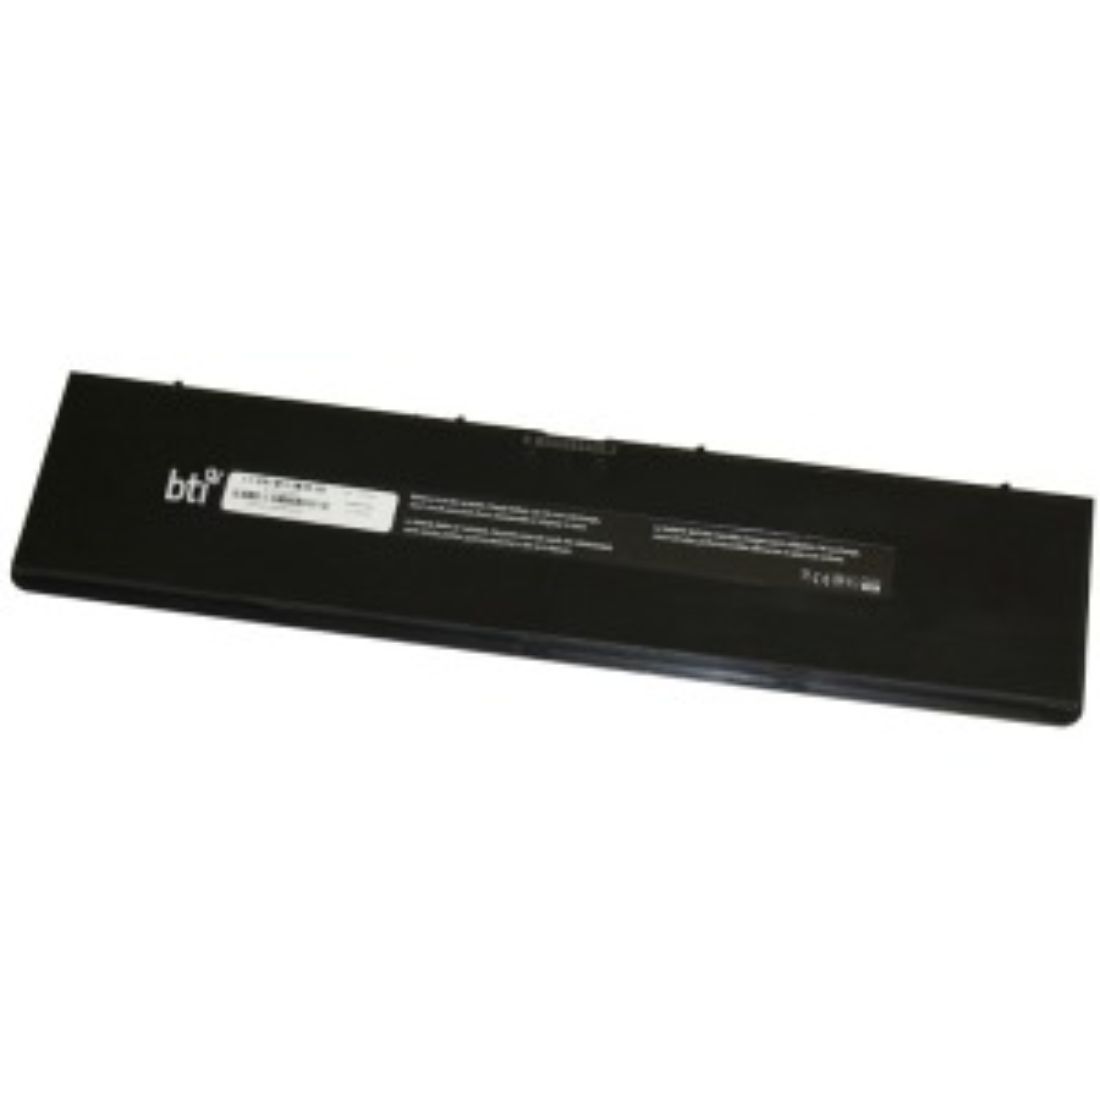 BTI Battery 5000mAh 7.4V Battery Replacement for Select Dell Laptops DL-E7440X2